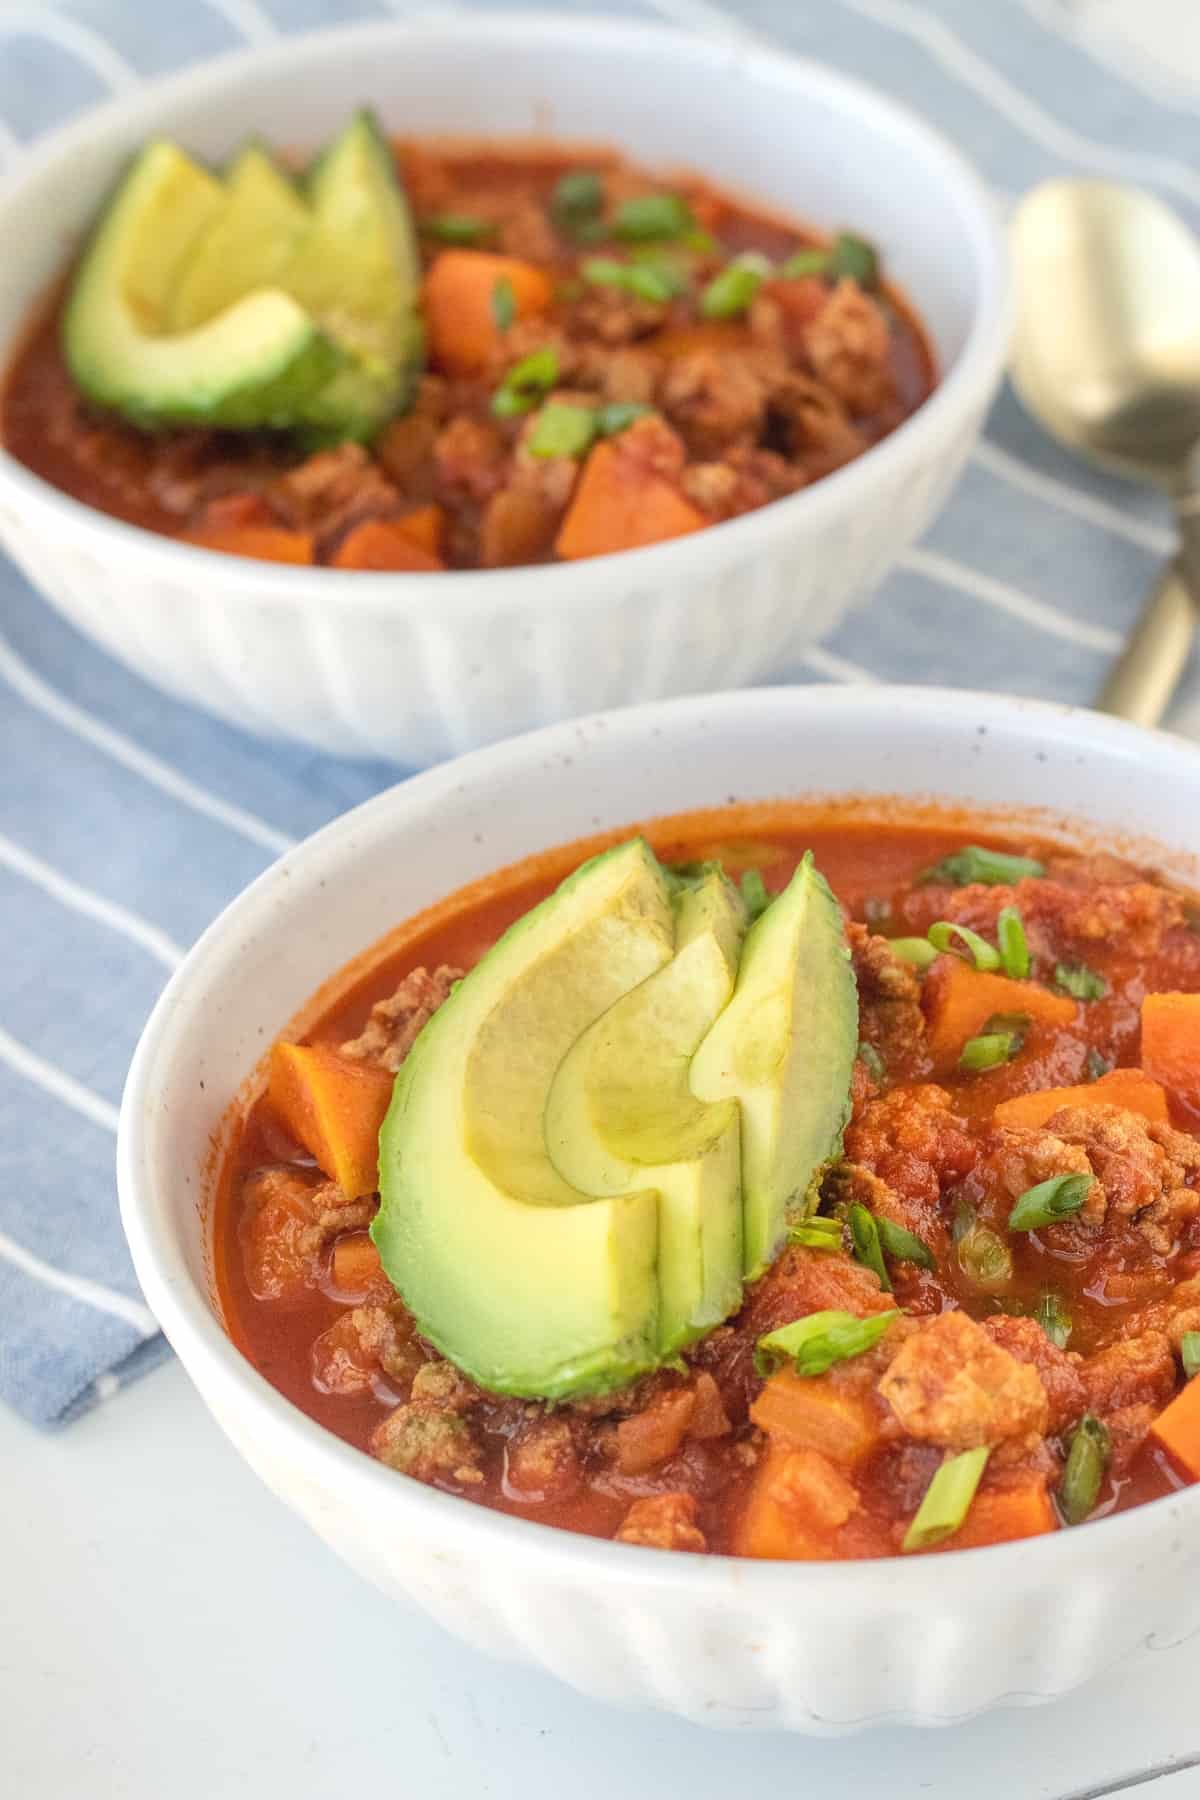 Healthy turkey chili is made with sweet potato and no beans so that it's Paleo and Whole30 friendly. Lean ground turkey is simmered with onions, bell peppers, tomatoes, and some pantry staples to make a quick and easy weeknight dinner (or meal prep!)